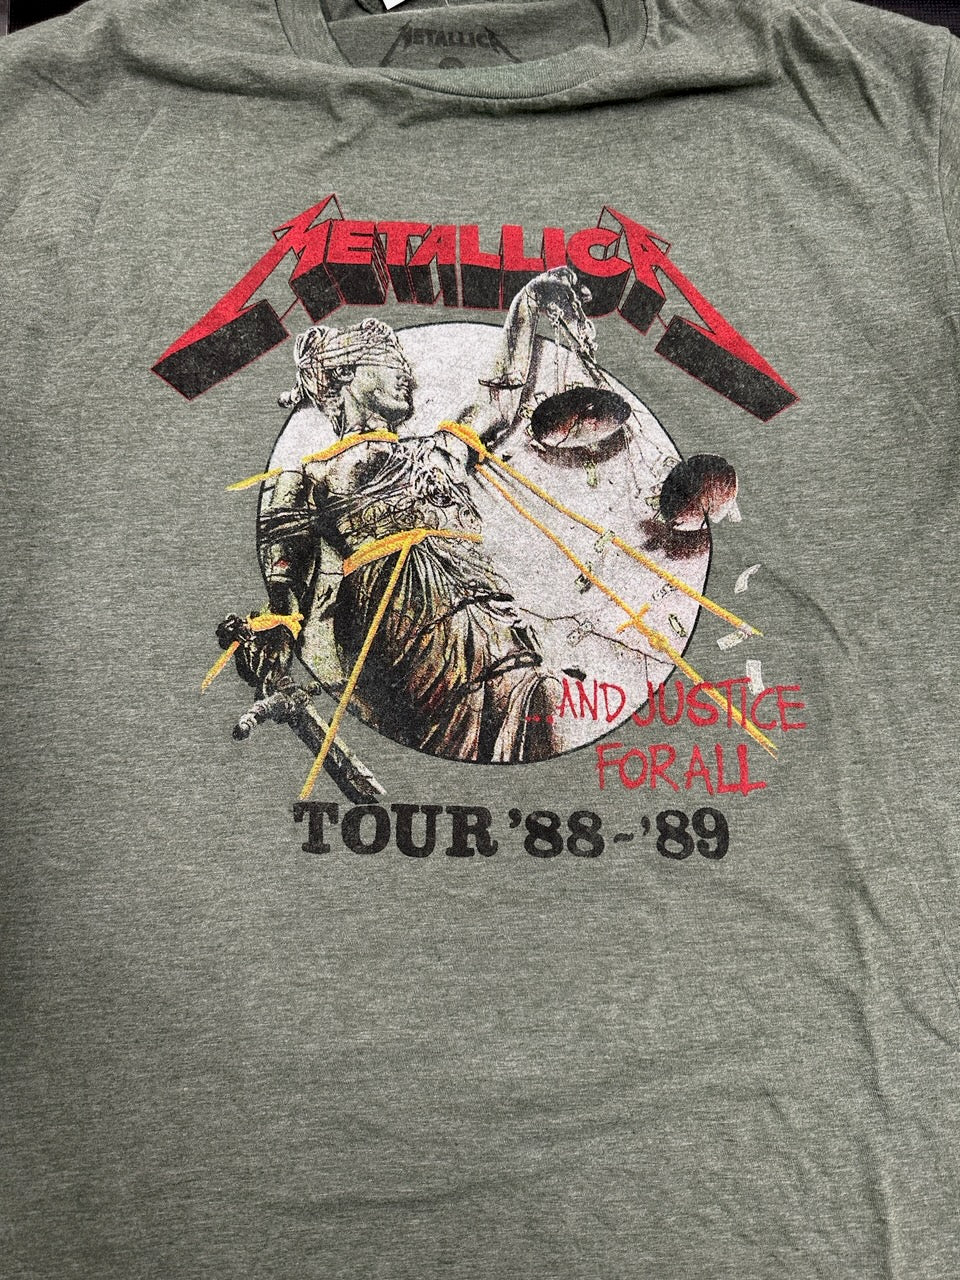 Metallica And Justice For All '88-89 Tour REPRINT T-Shirt, Army Green, L